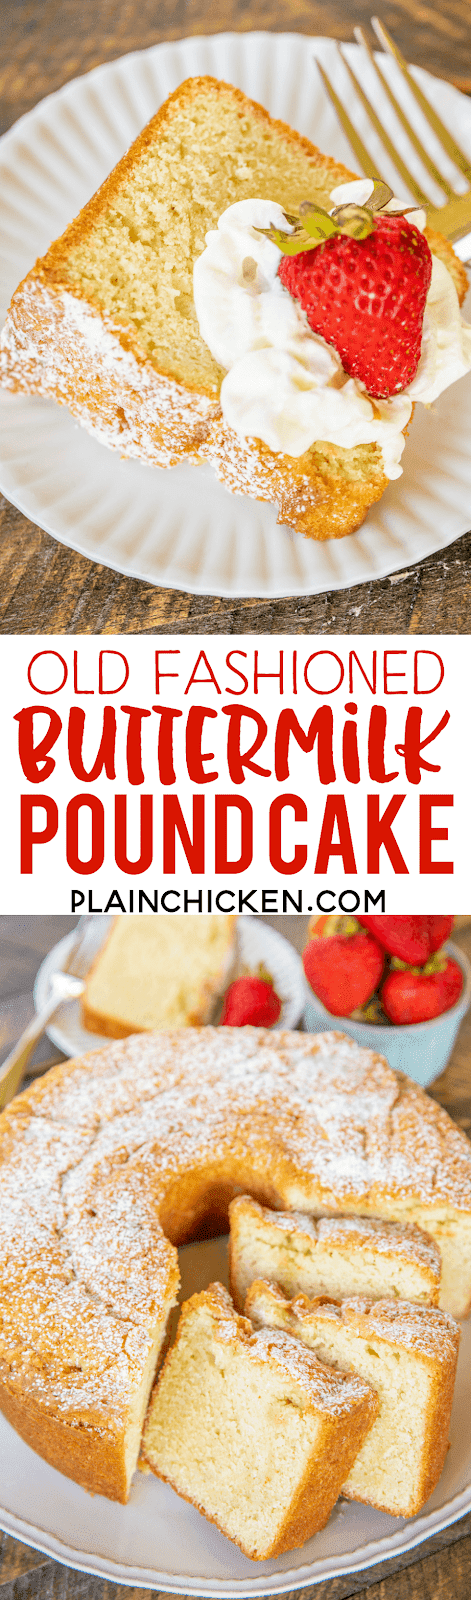 Old Fashioned Buttermilk Pound Cake - seriously the BEST pound cake we've ever made! SO delicious!! SO light and fluffy! Shortening, sugar, buttermilk, egg yolks, baking soda, flour, salt, vanilla and stiff egg whites. Fluffy egg whites make all the difference in this batter! Can make ahead of time and store in an air-tight container. Freeze any leftovers for a quick dessert later. You MUST make this cake ASAP!! #cake #dessert #poundcake